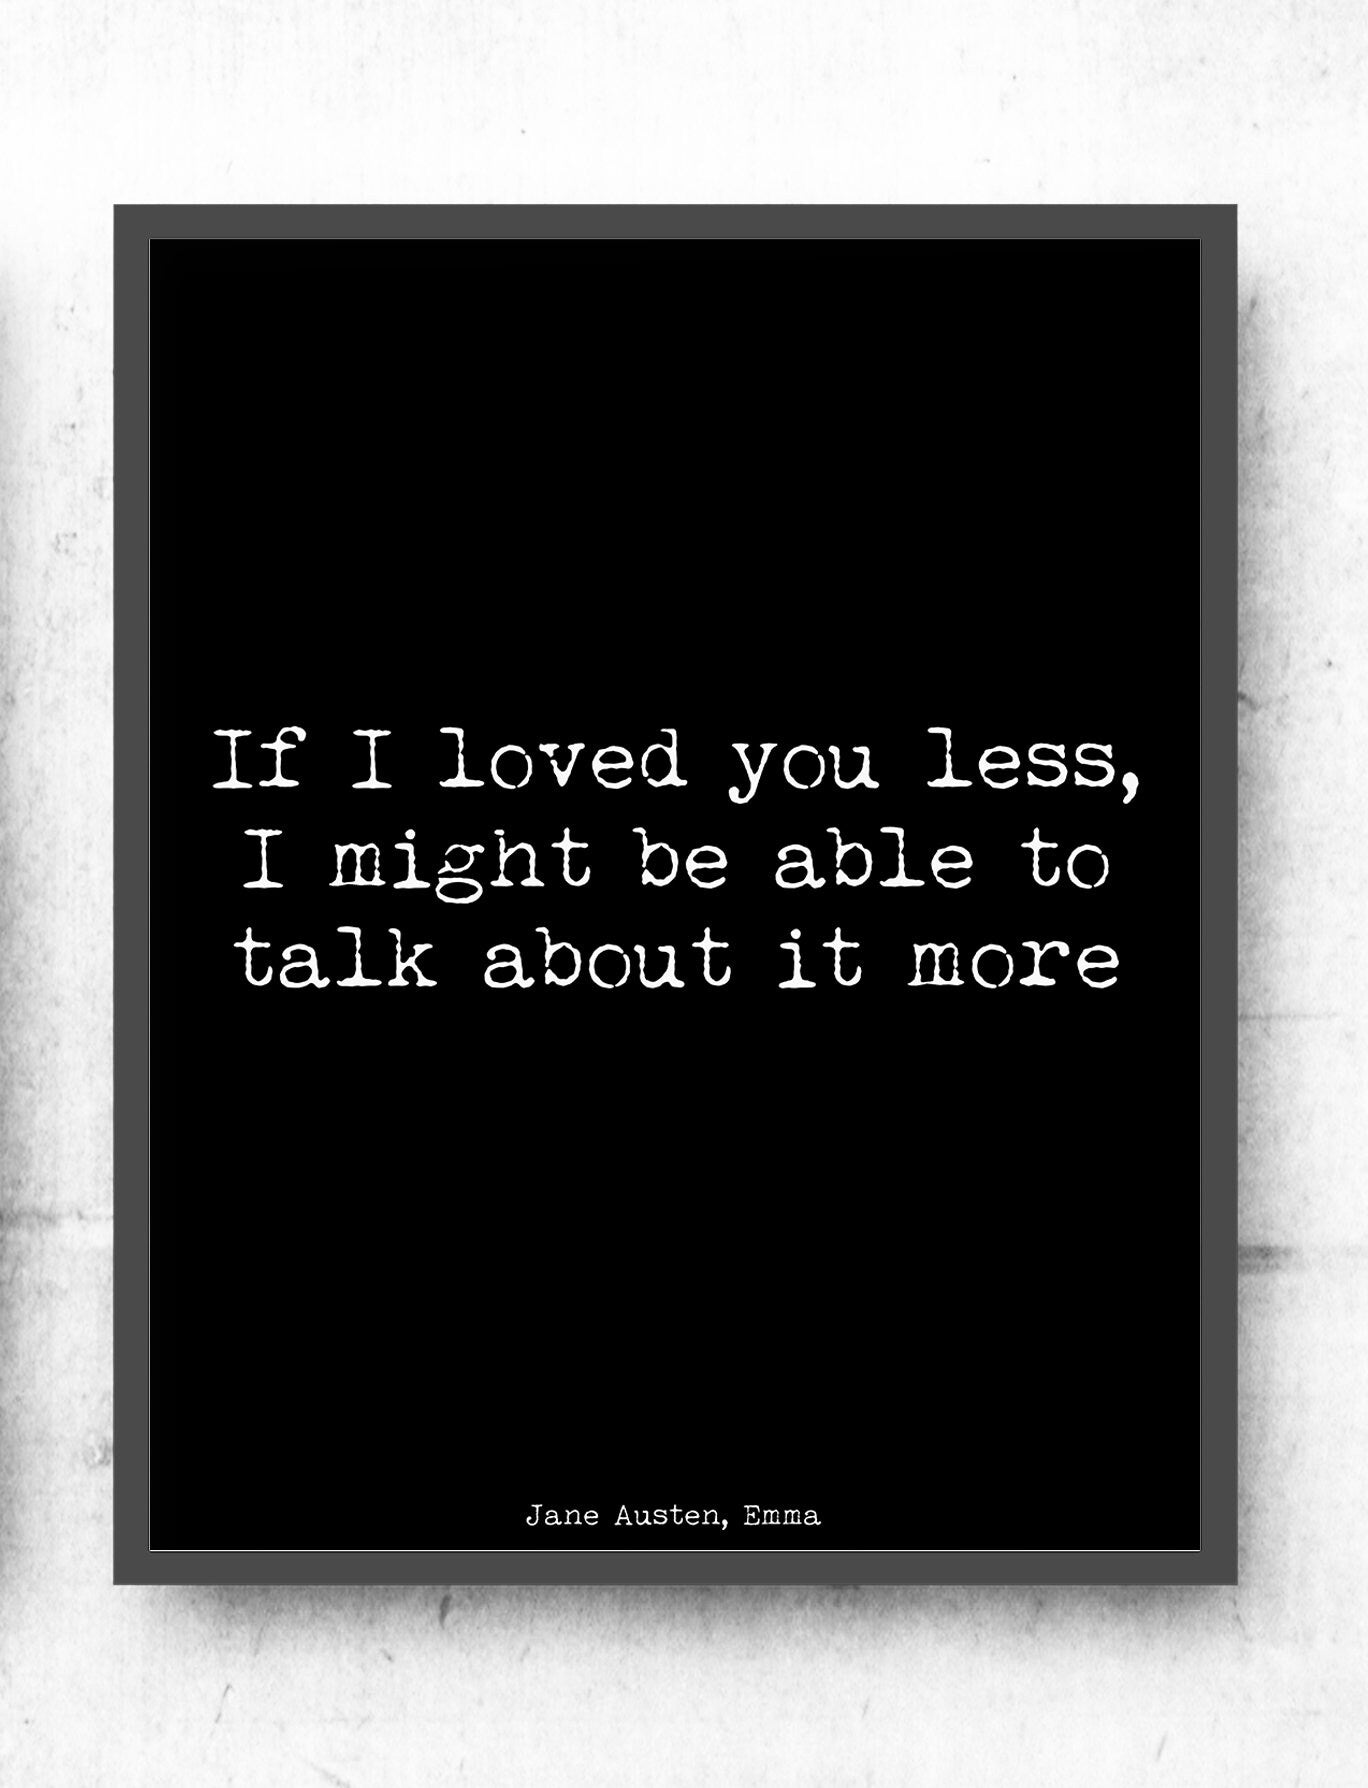 Jane Austen Quote Print, Emma Book Print - If I Loved You Less